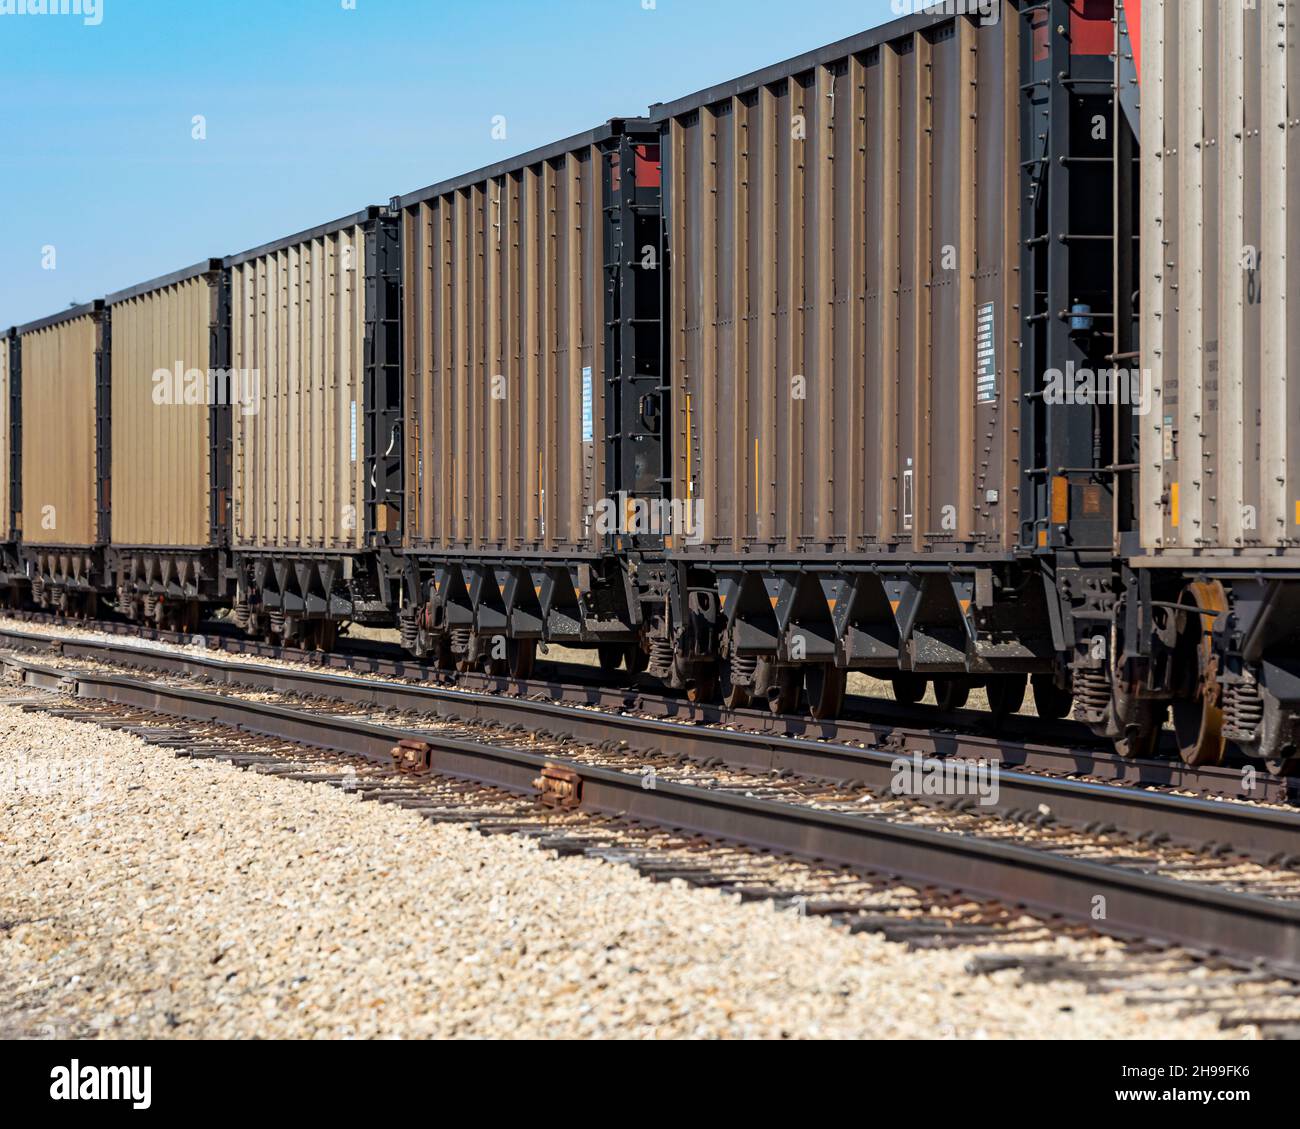 Freight train cars on railroad tracks. Supply chain, rail transportation and shipping concept. Stock Photo